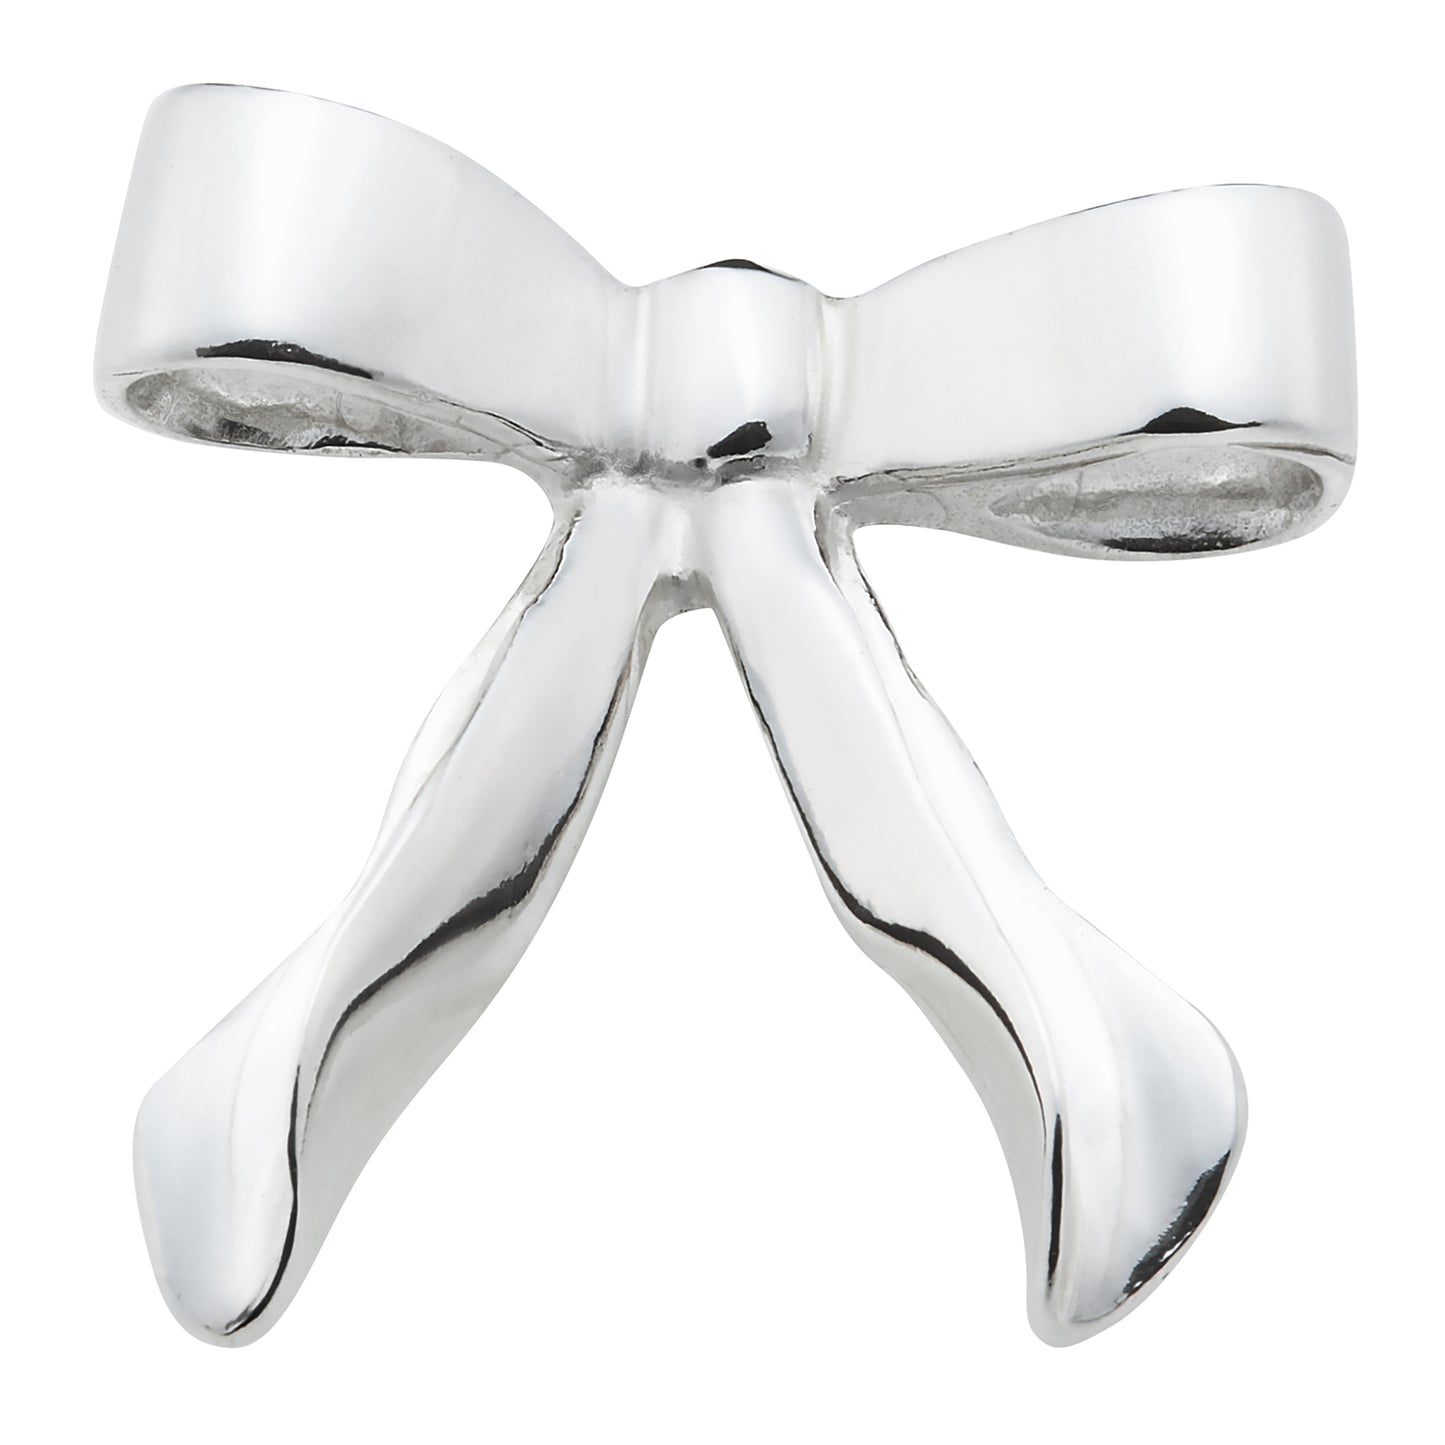 Bow Silver Necklace